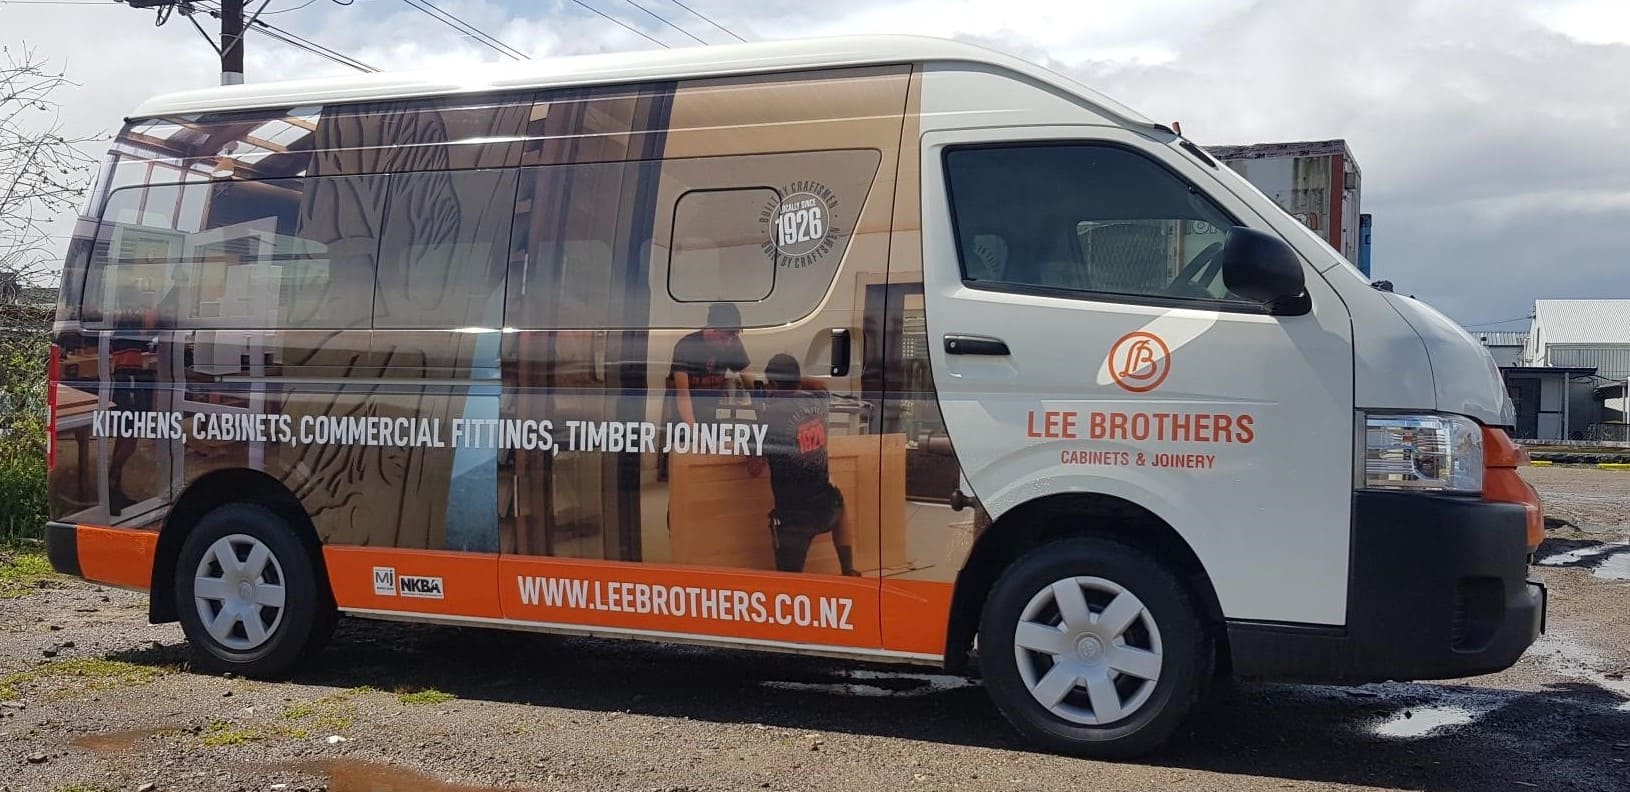 Lee brother cabinetry and joinery van